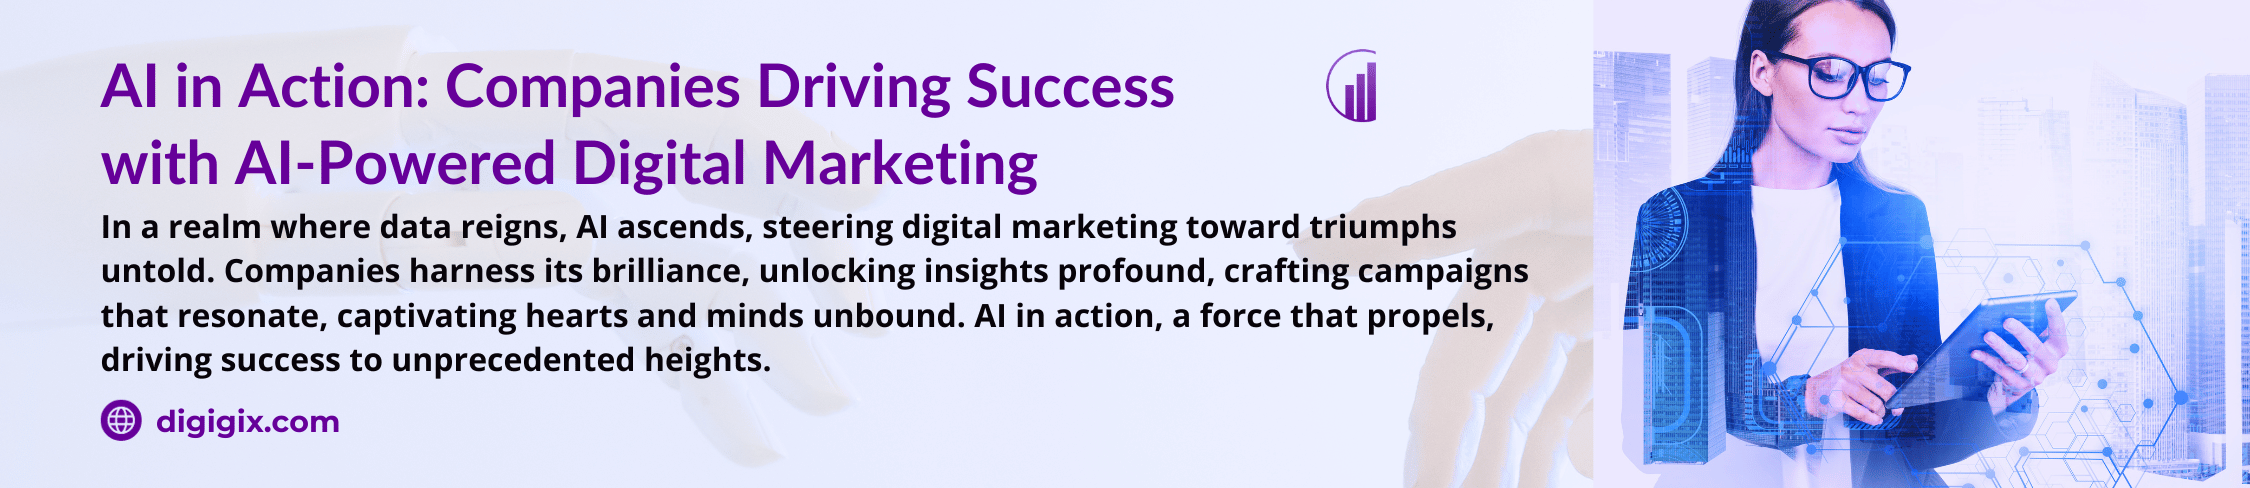 AI in Action Companies Driving Success with AI-Powered Digital Marketing